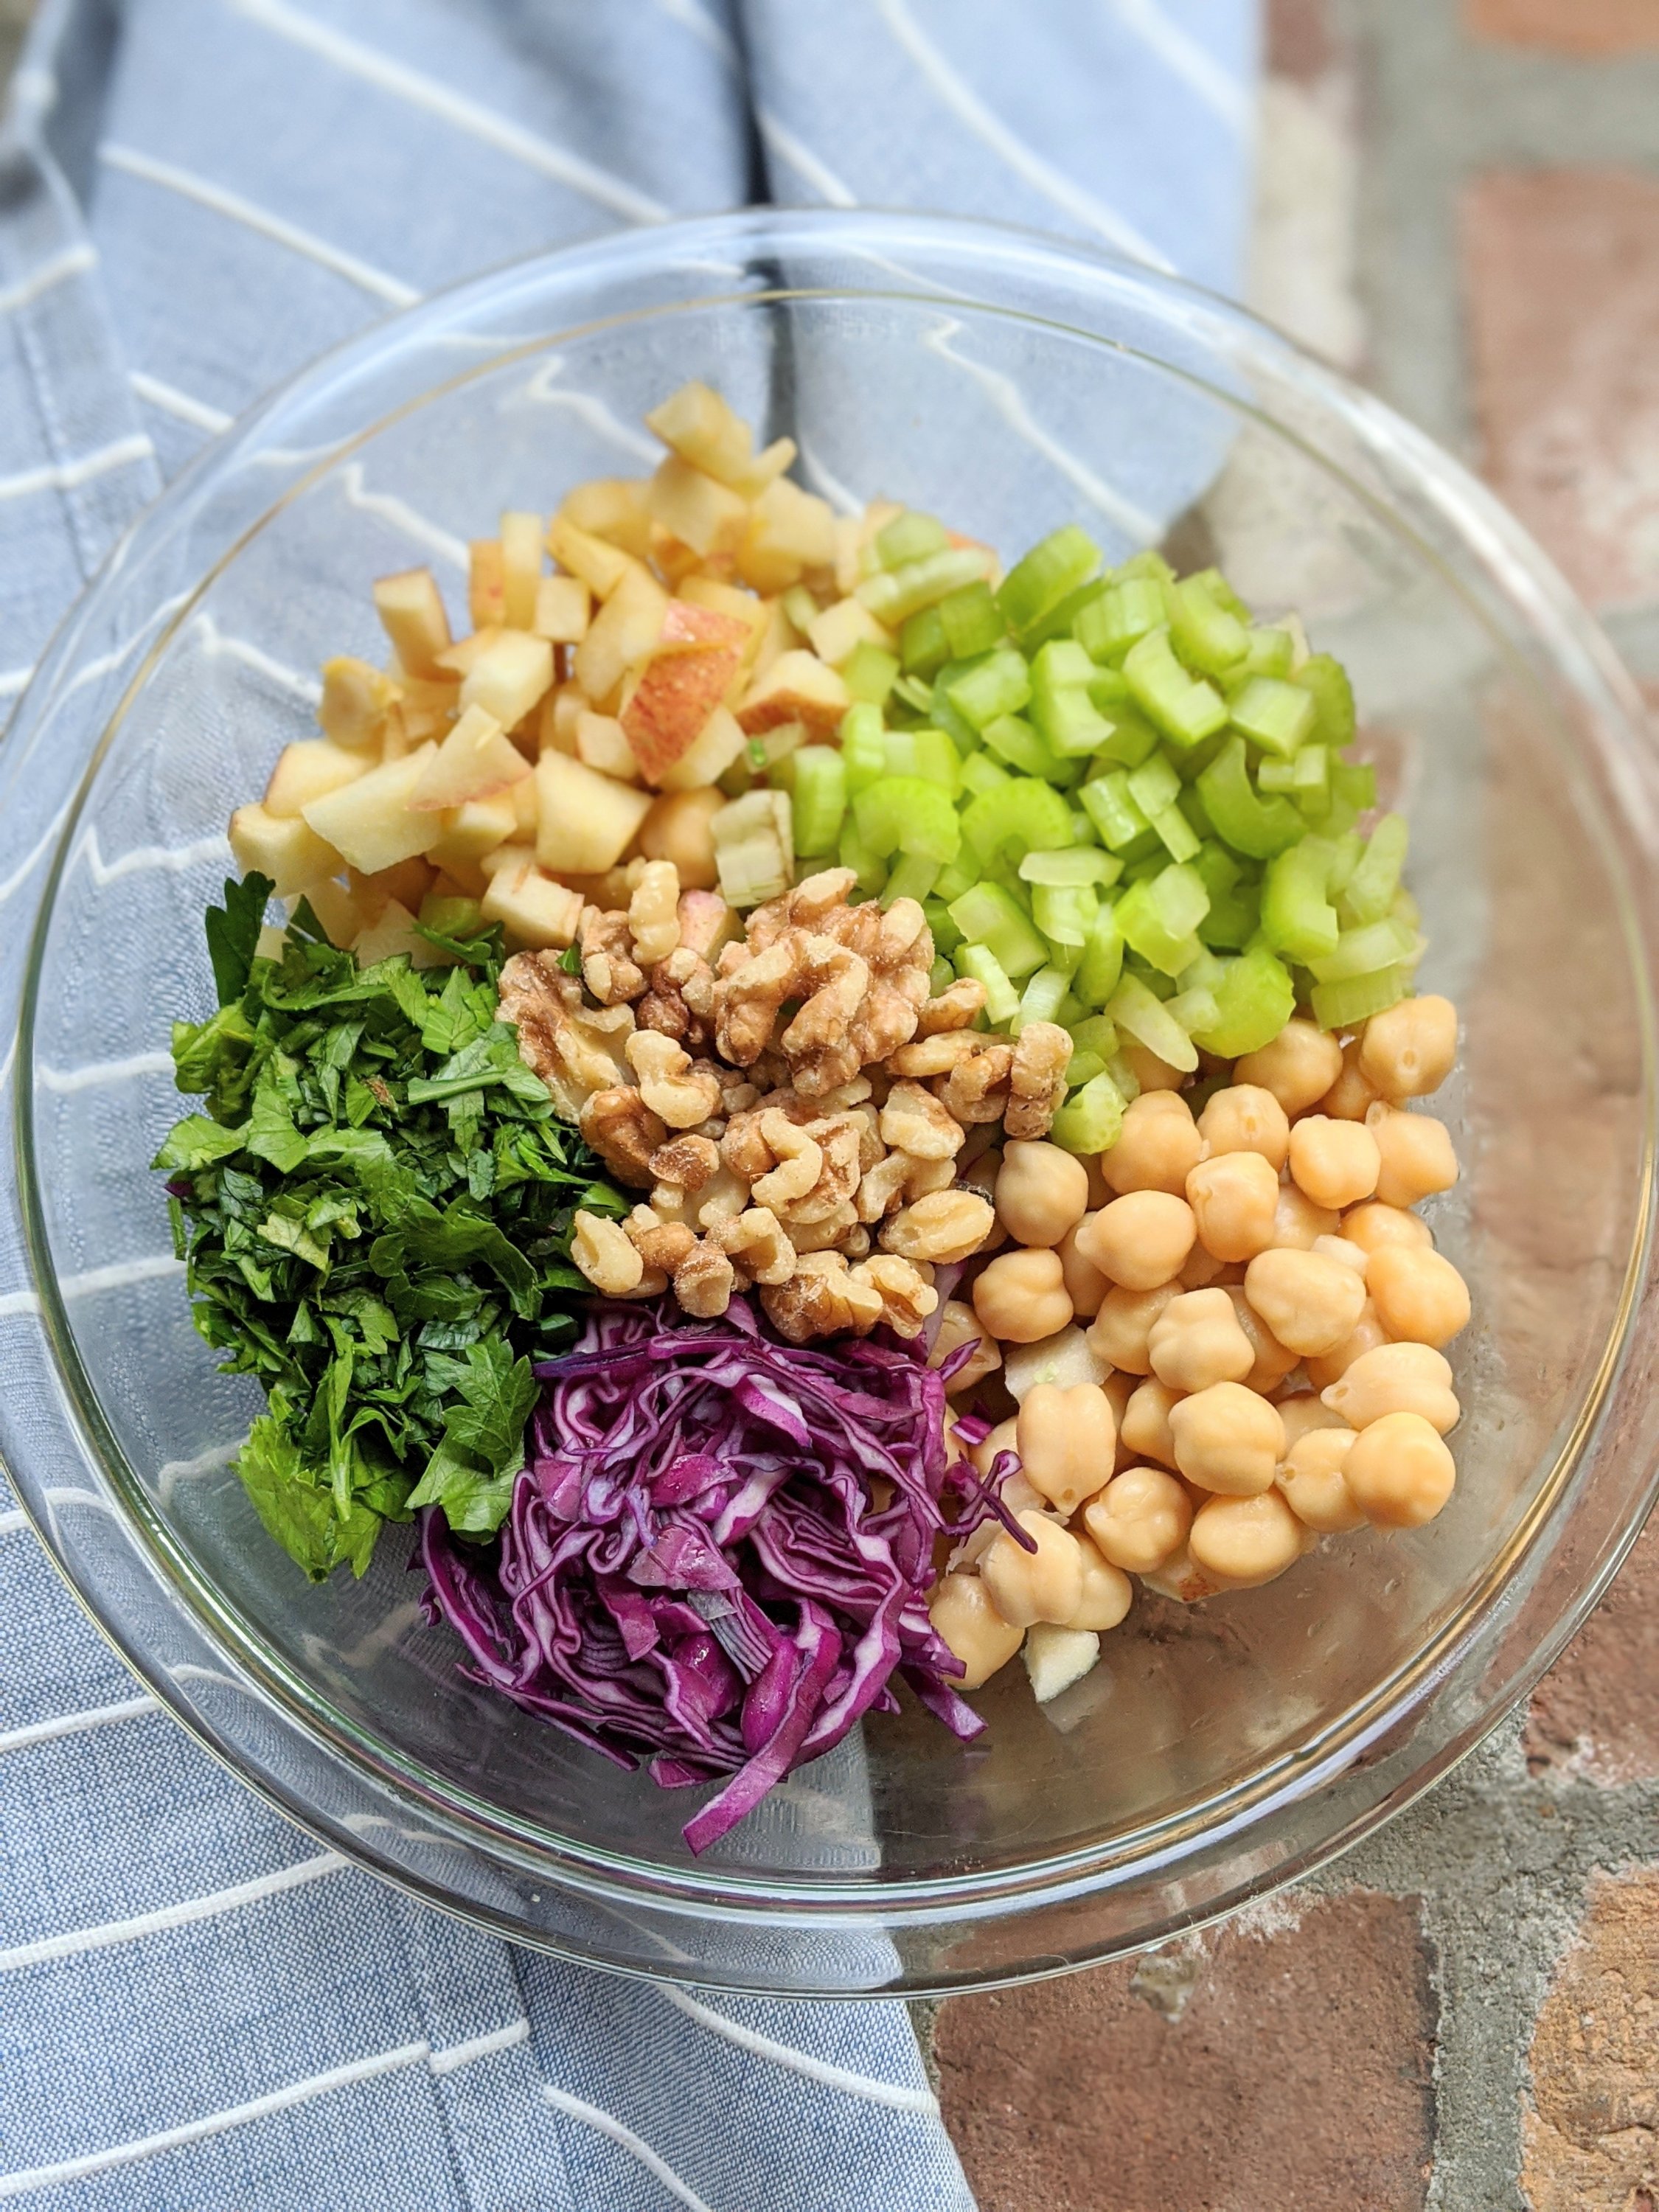 sweet and salty salad recipe vegan gluten free high protein meal prep friendly salads that won't wilt keep their texture chickpeas cabbage apples walnuts celery